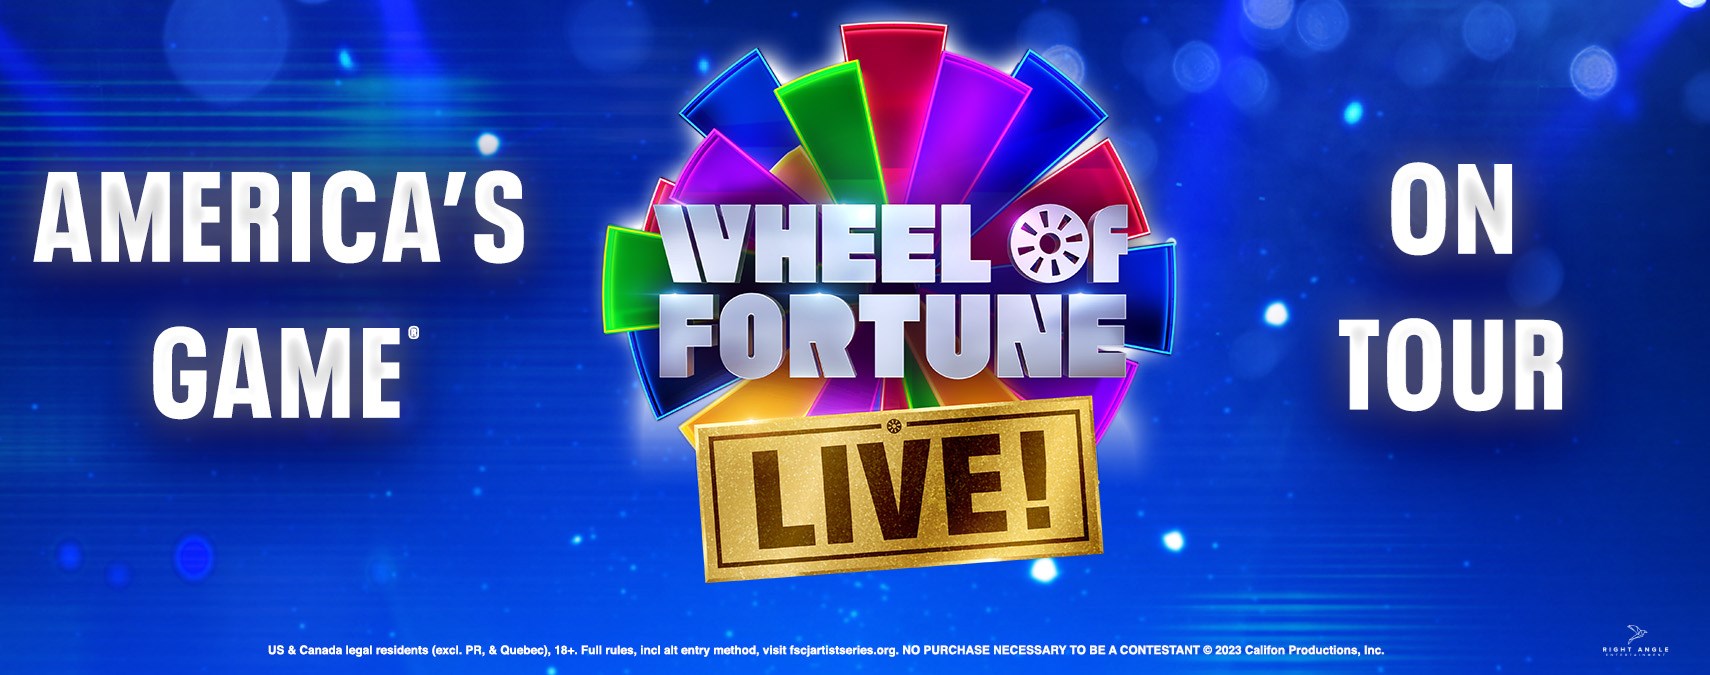 Wheel of Fortune LIVE!- December 20, 2023 at 7:30pm